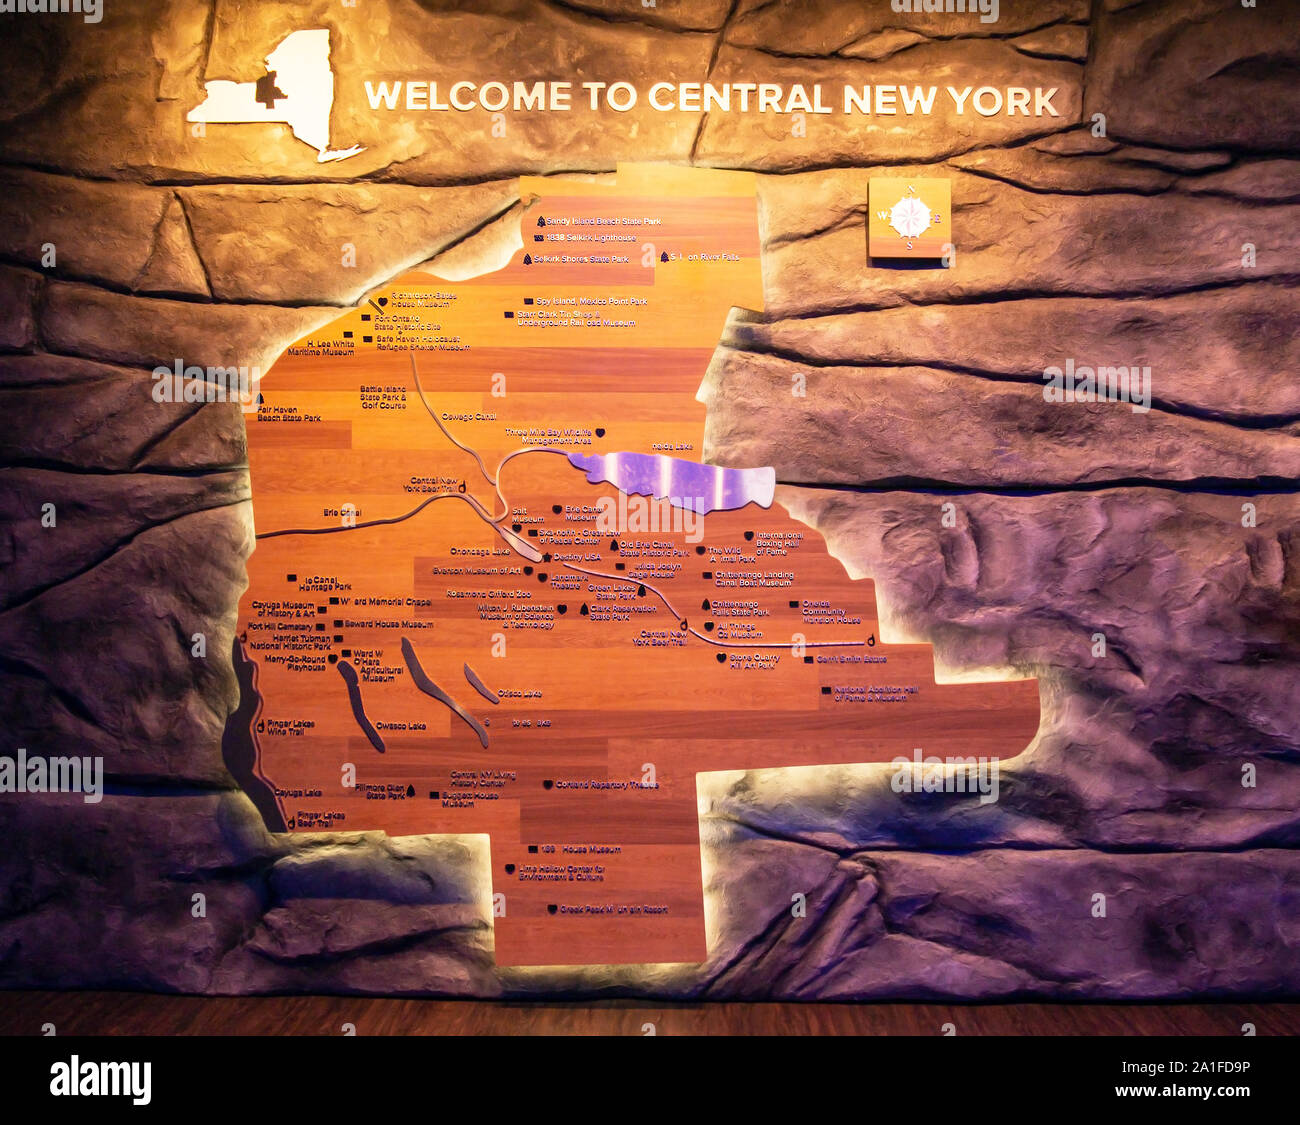 Display with map of central New York attractions Stock Photo